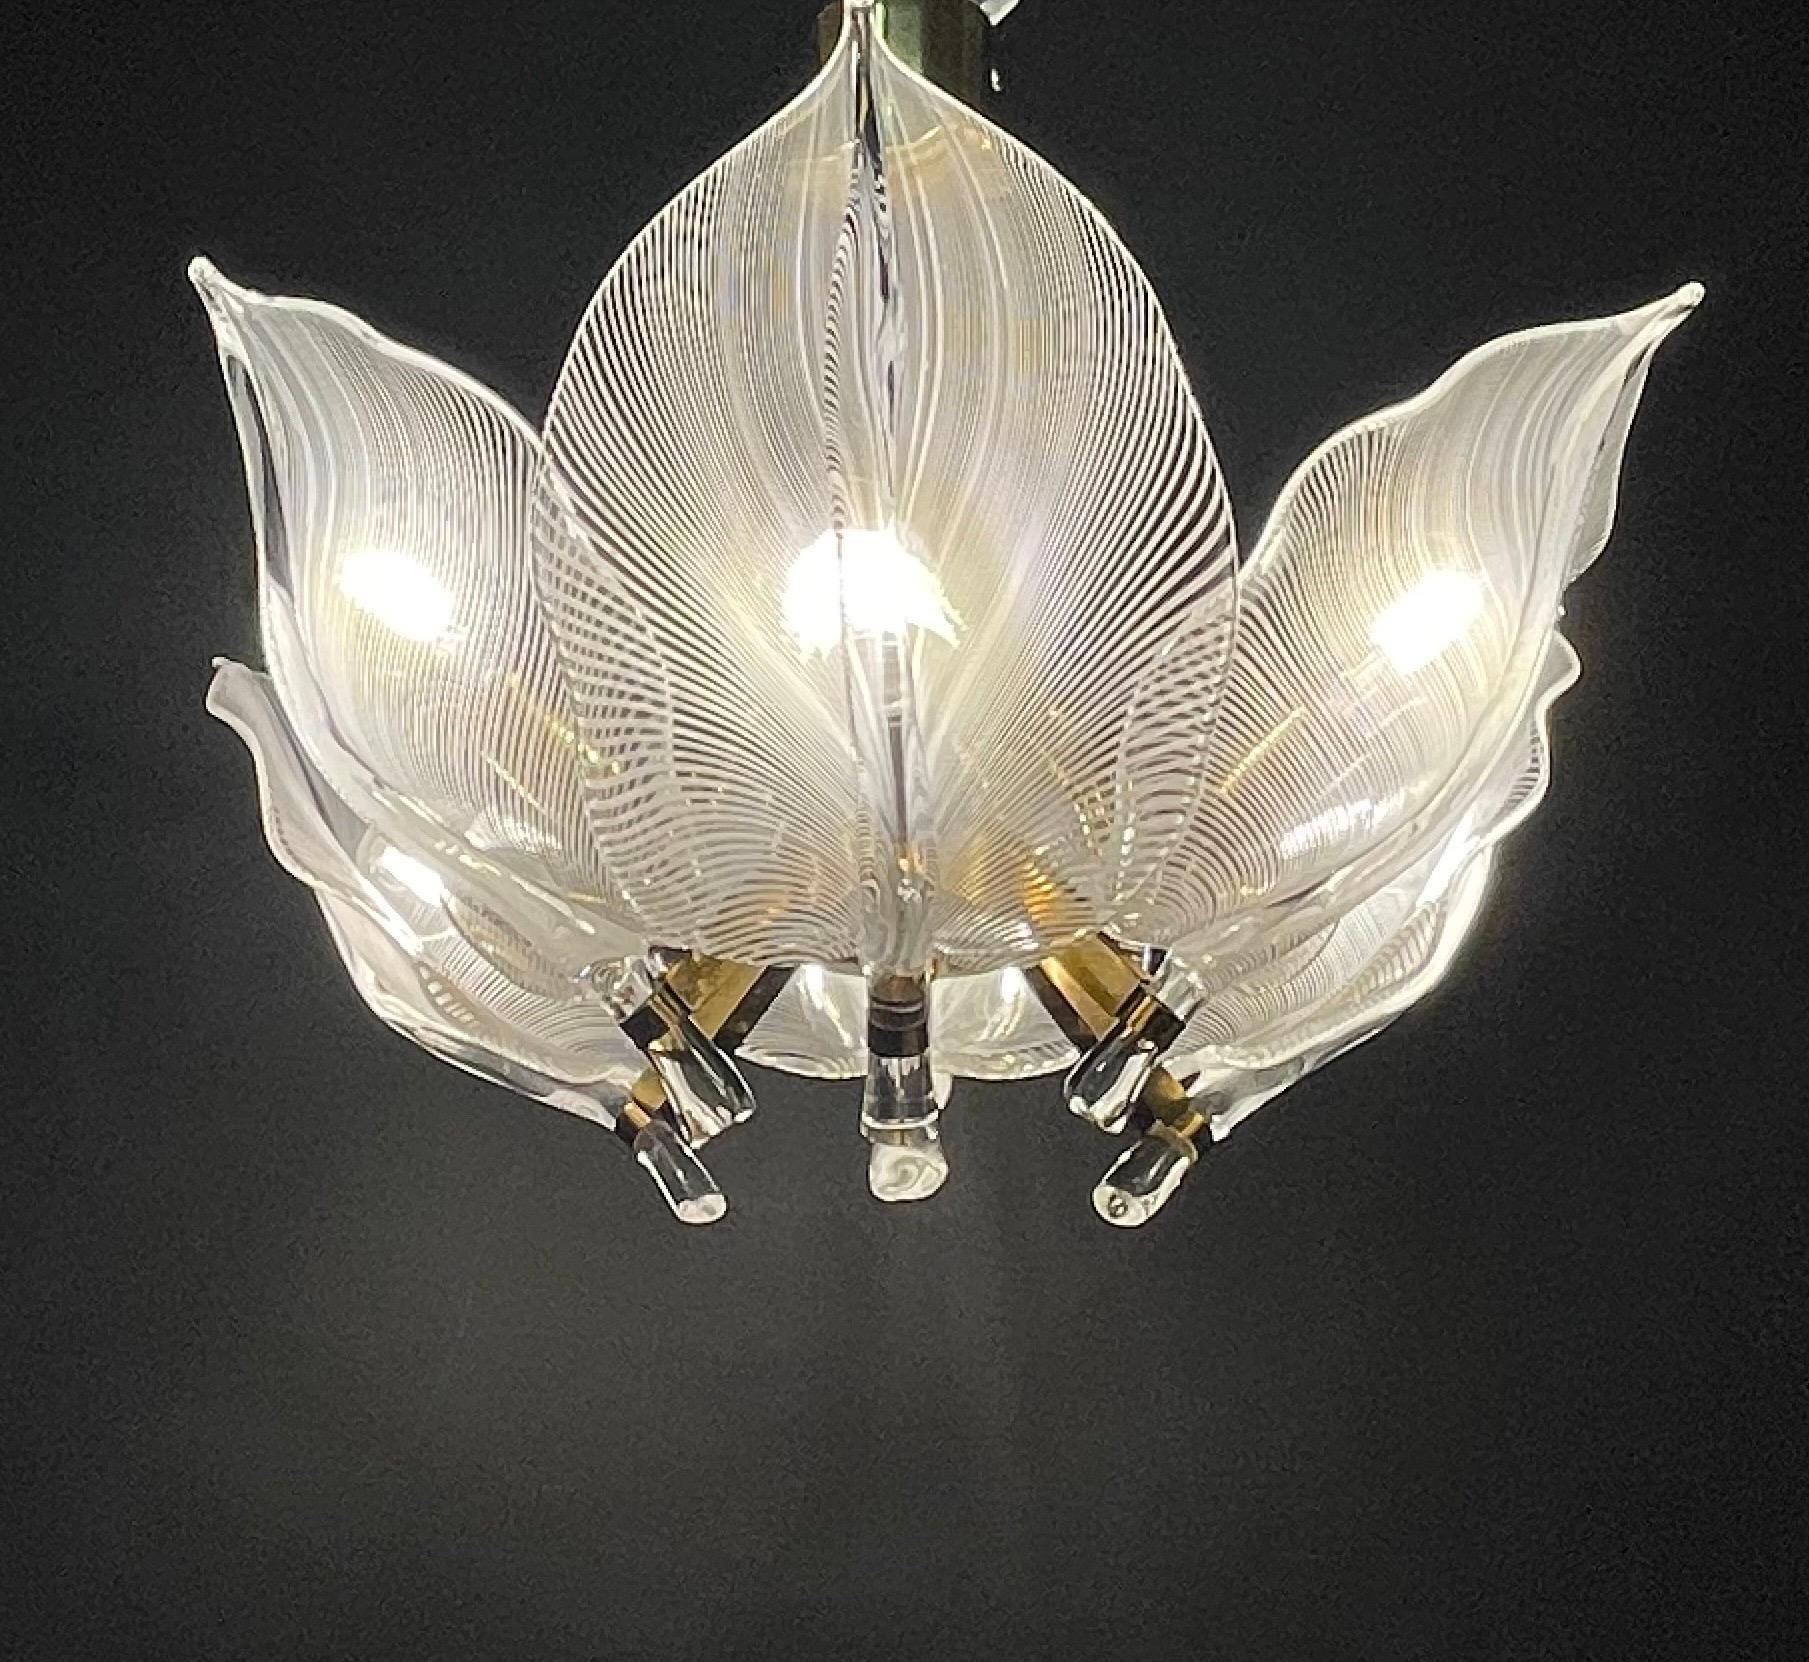 A beautiful Italian six-light clear / white striped Murano glass and gold - plated brass chandelier by Franco Luce for Seguso, circa 1970s.
Socket: 6 x e27 or E26 (for US standards).
The condition is excellent.
